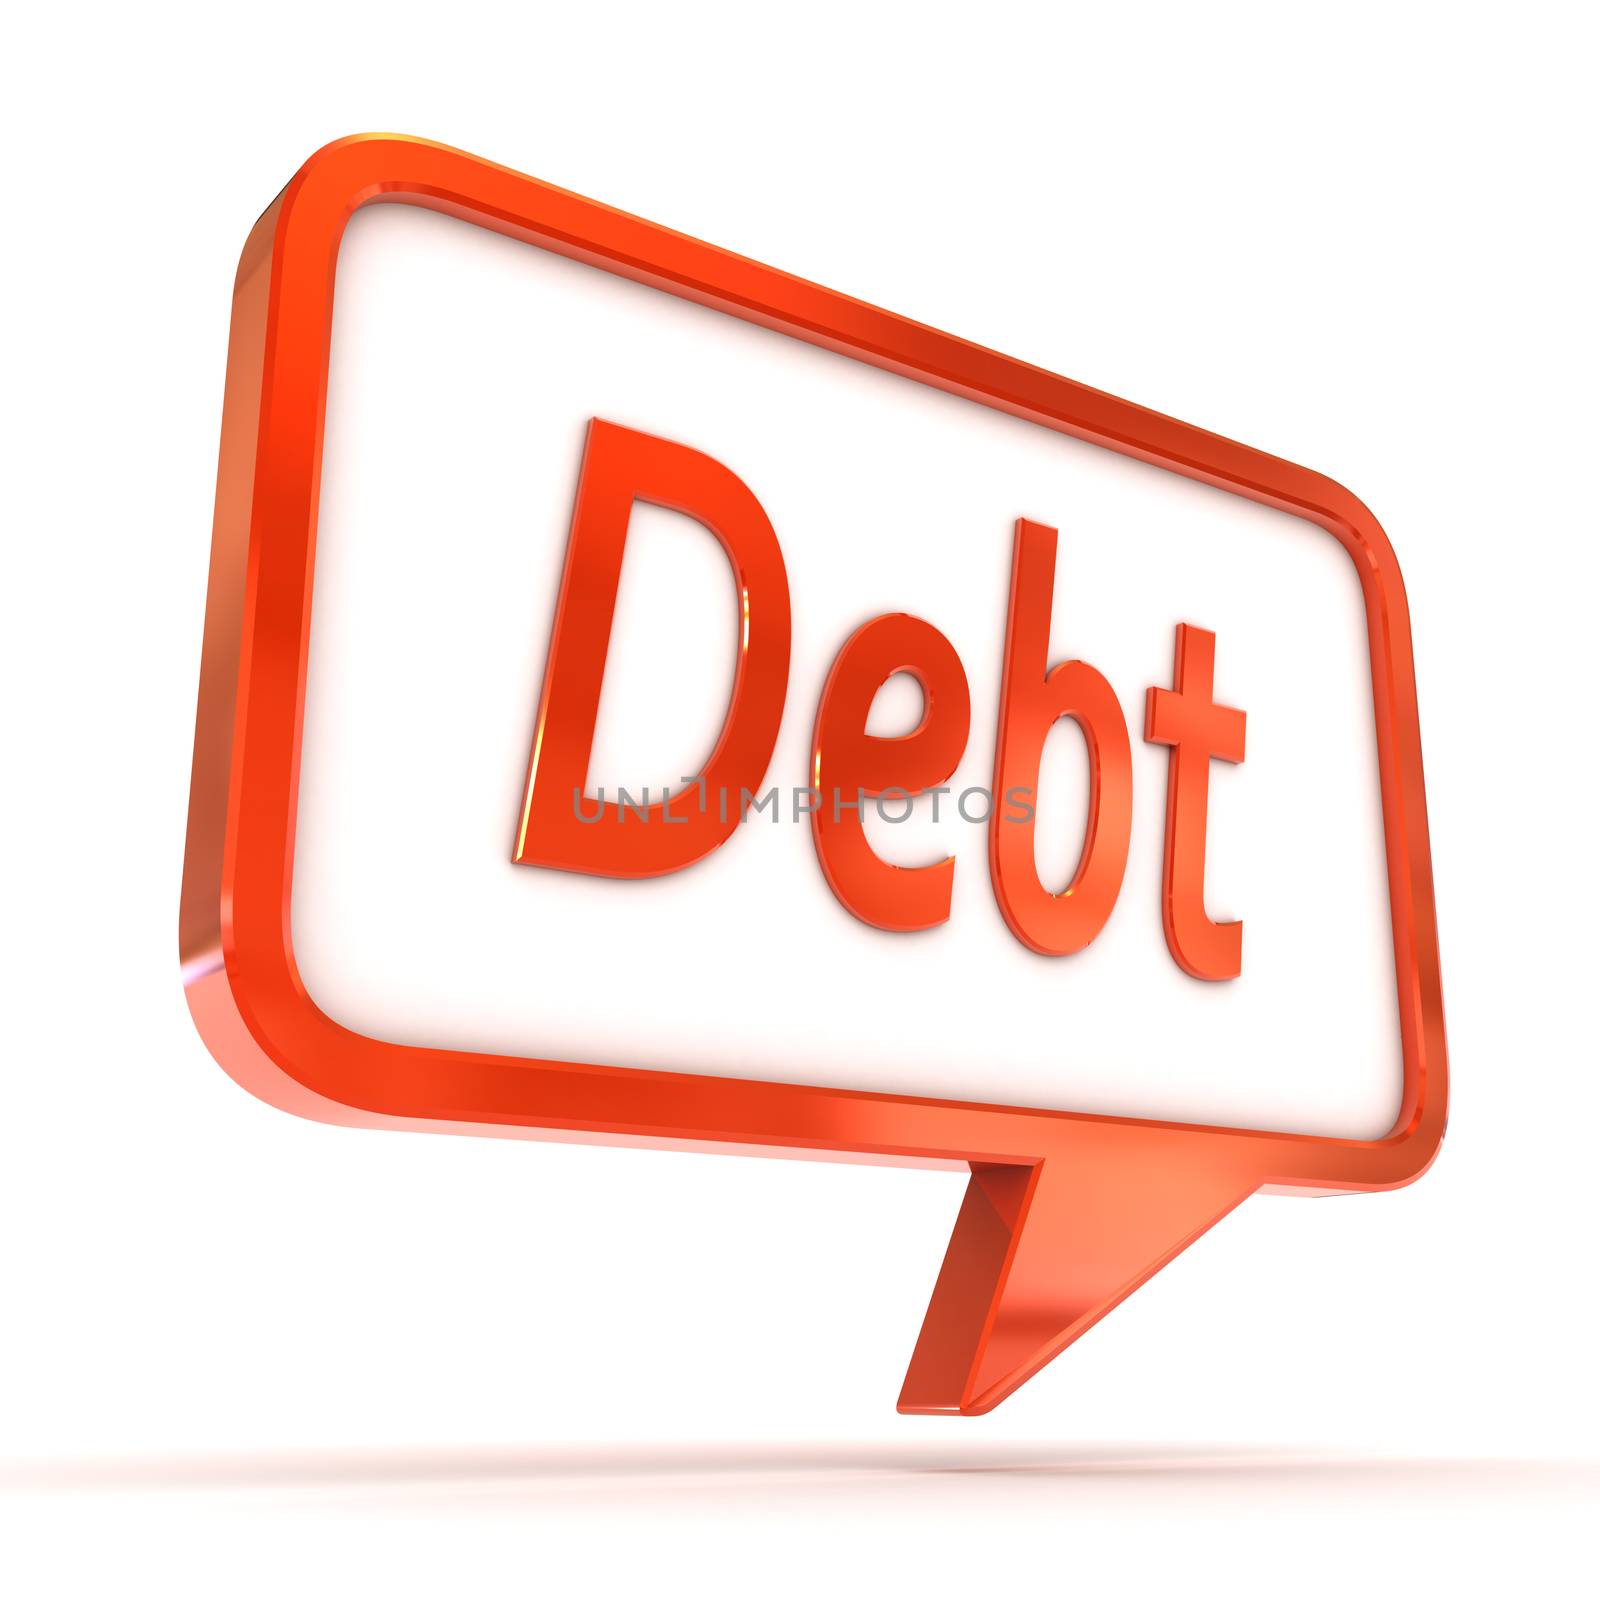 A Colourful 3d Rendered Concept Illustration showing "Debt" writen in a Speech Bubble